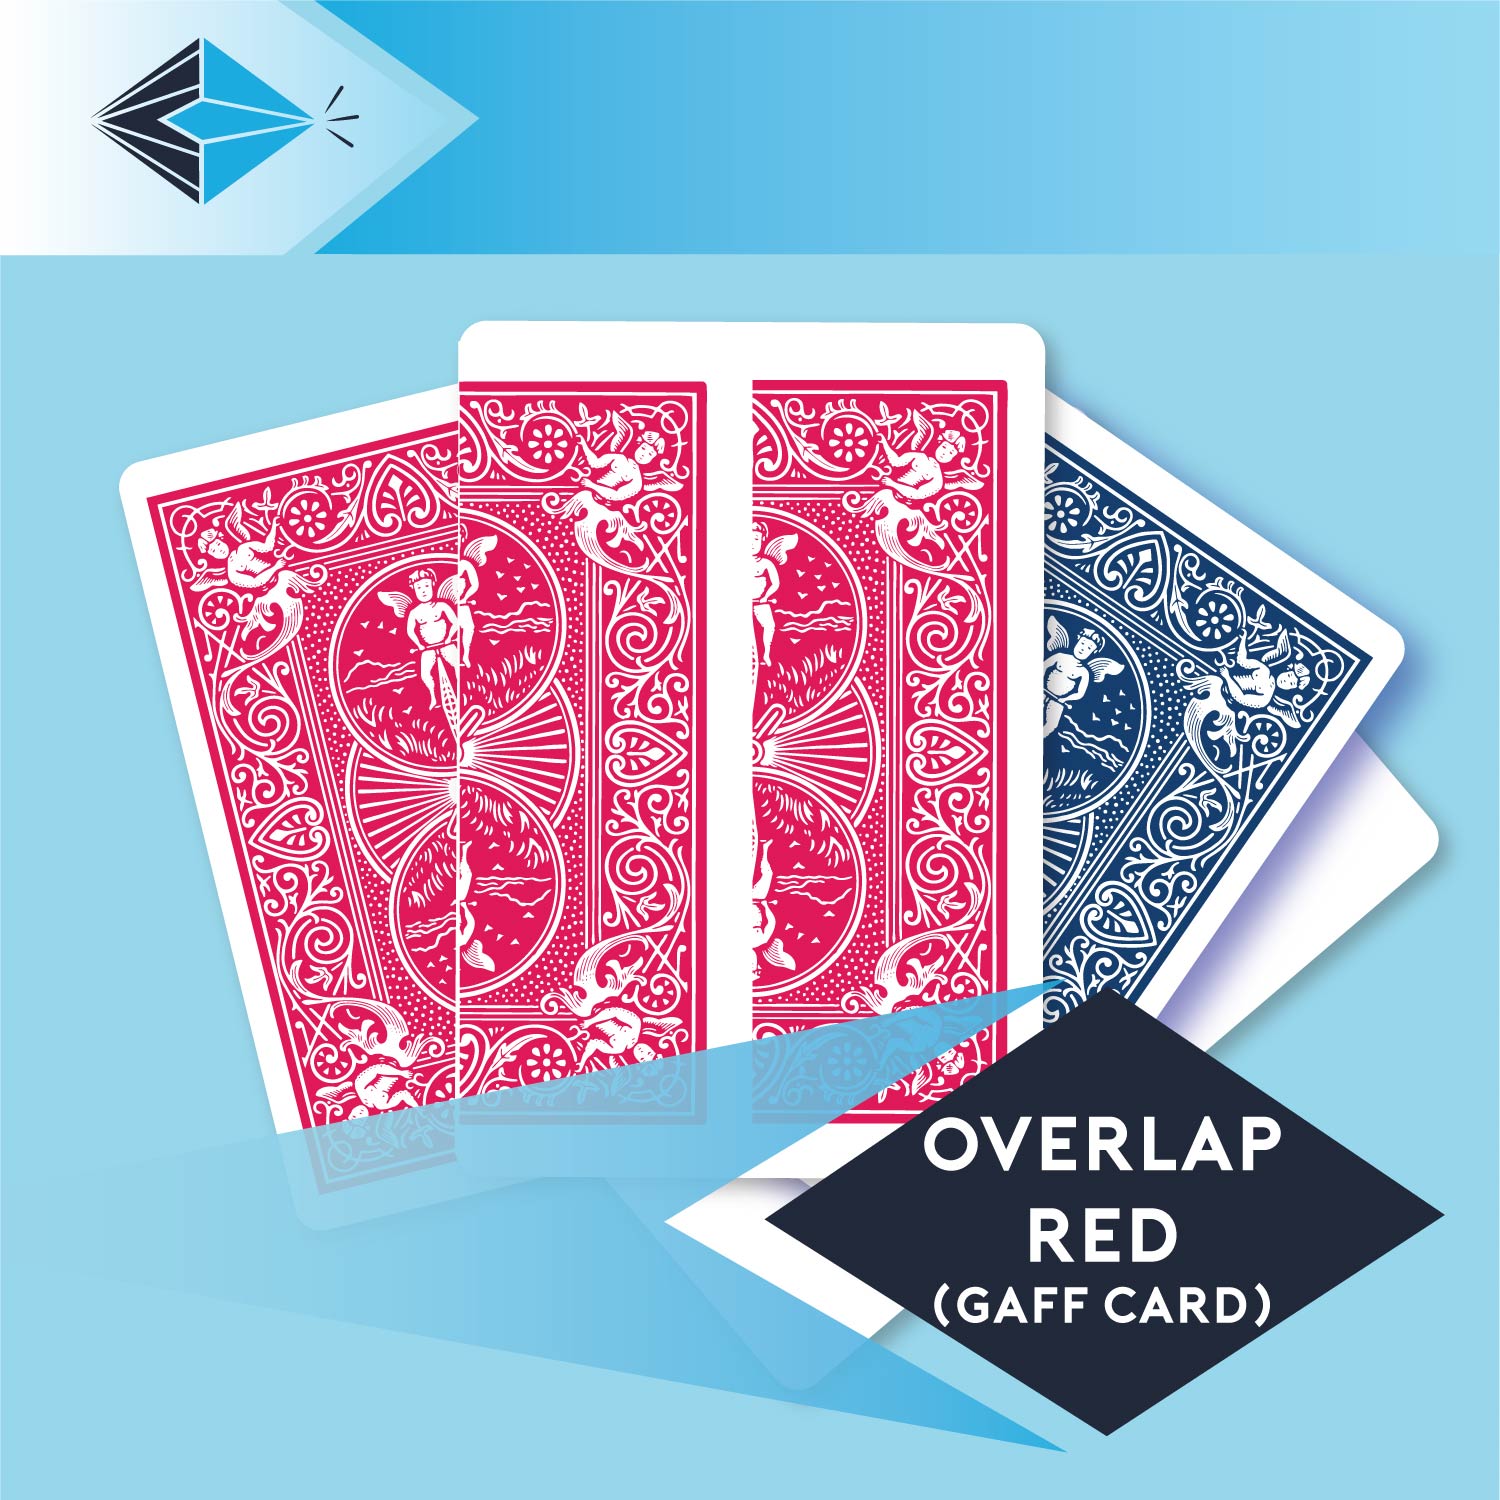 Overlap Red gaff card 29 playing card for magicians printing printers Stockport Manchester UK